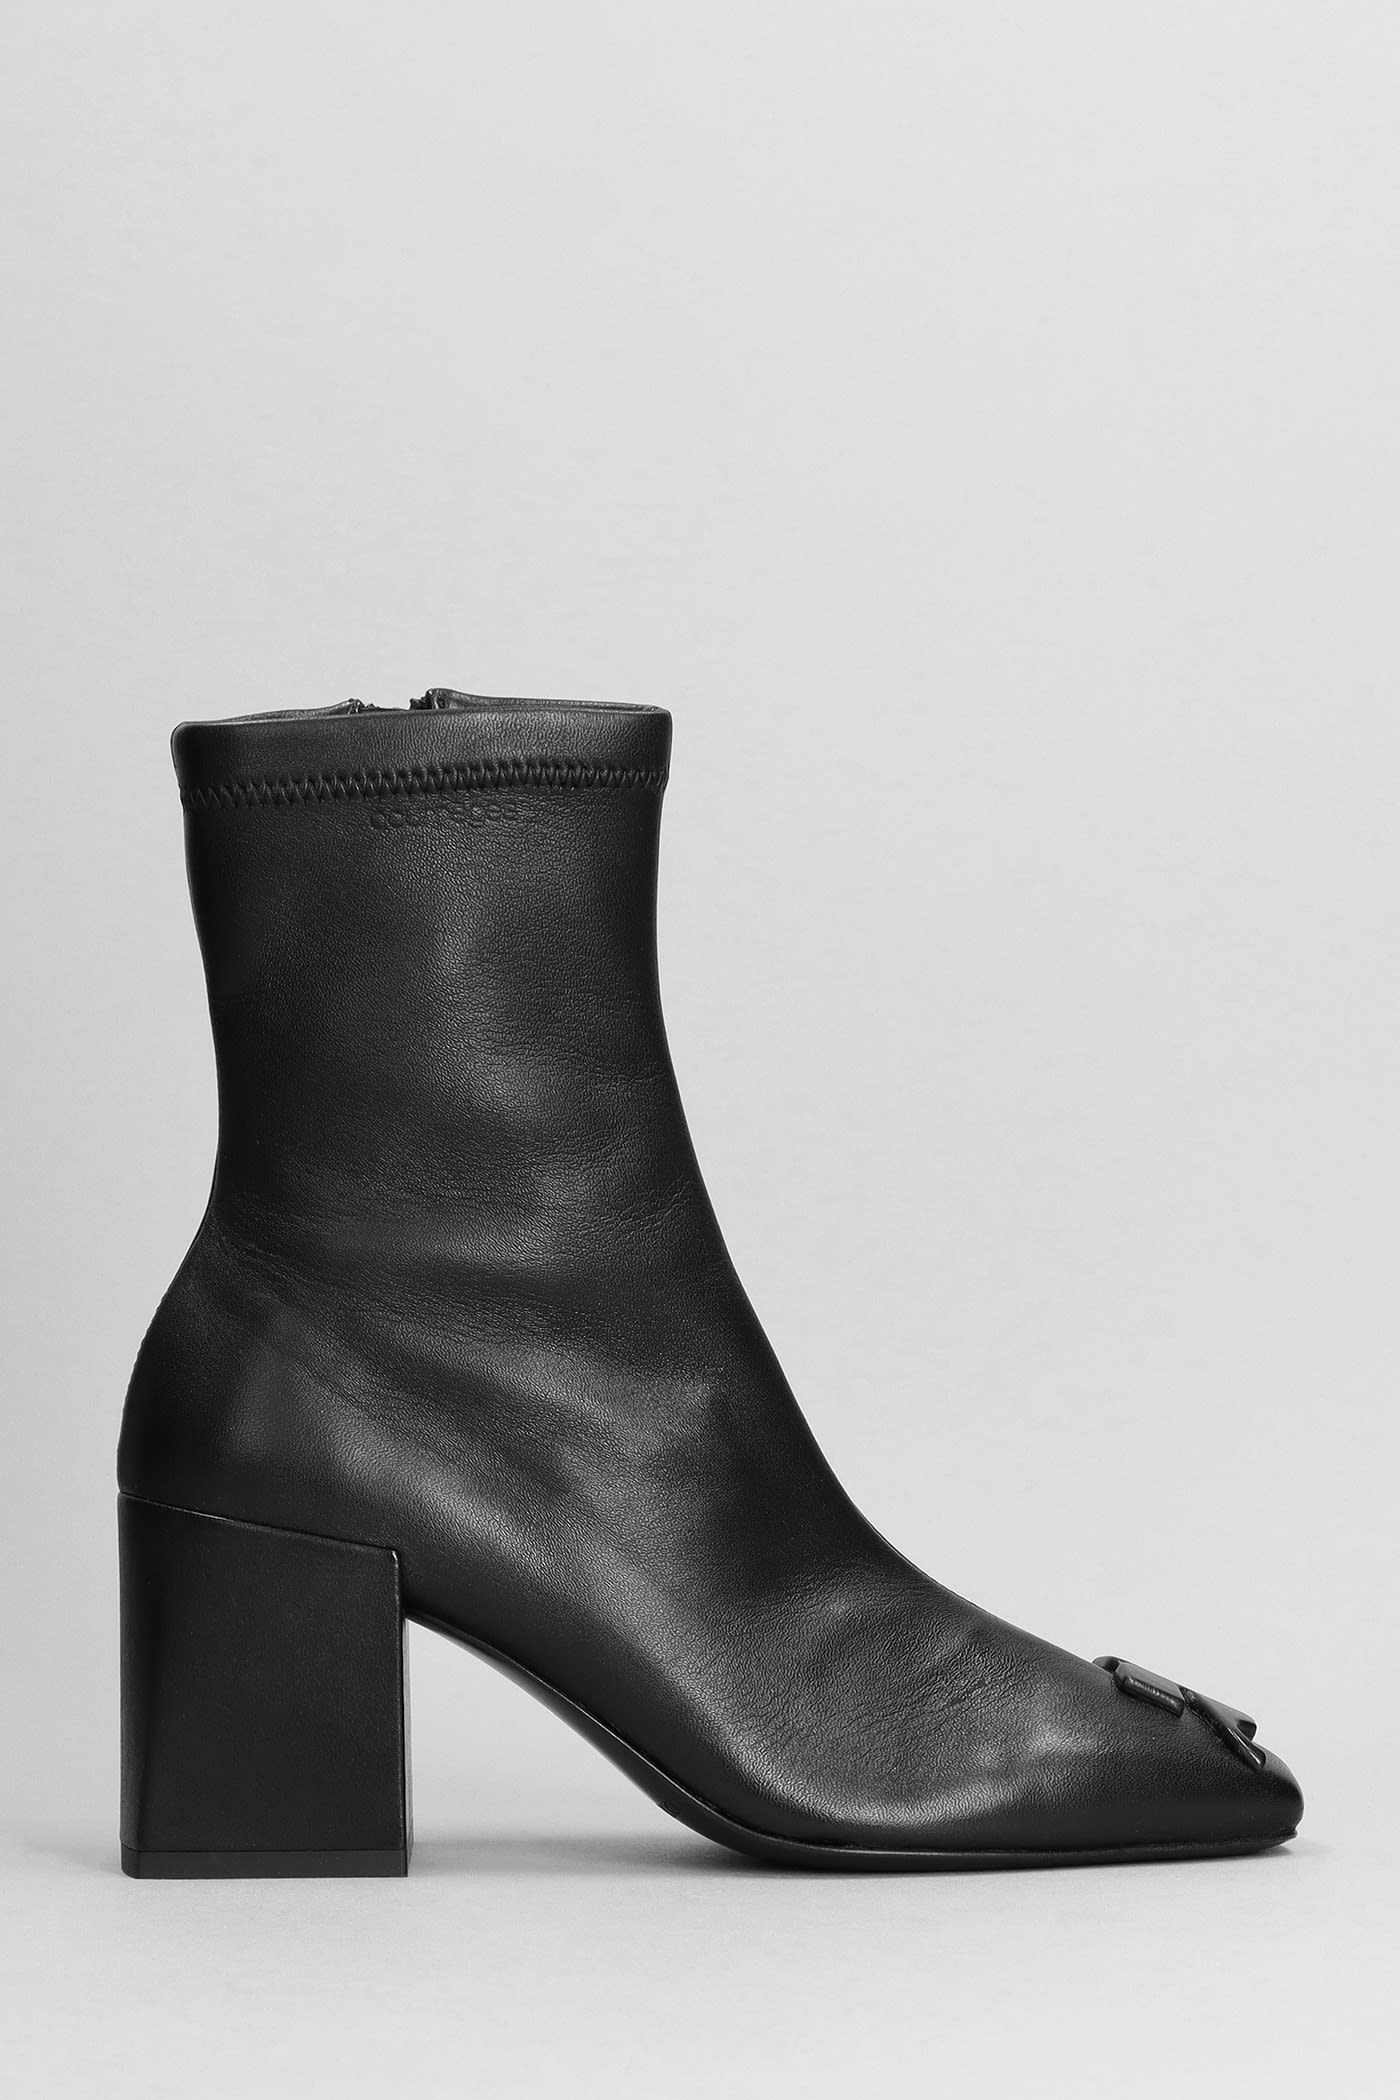 COURRÈGES HIGH HEELS ANKLE BOOTS IN BLACK LEATHER